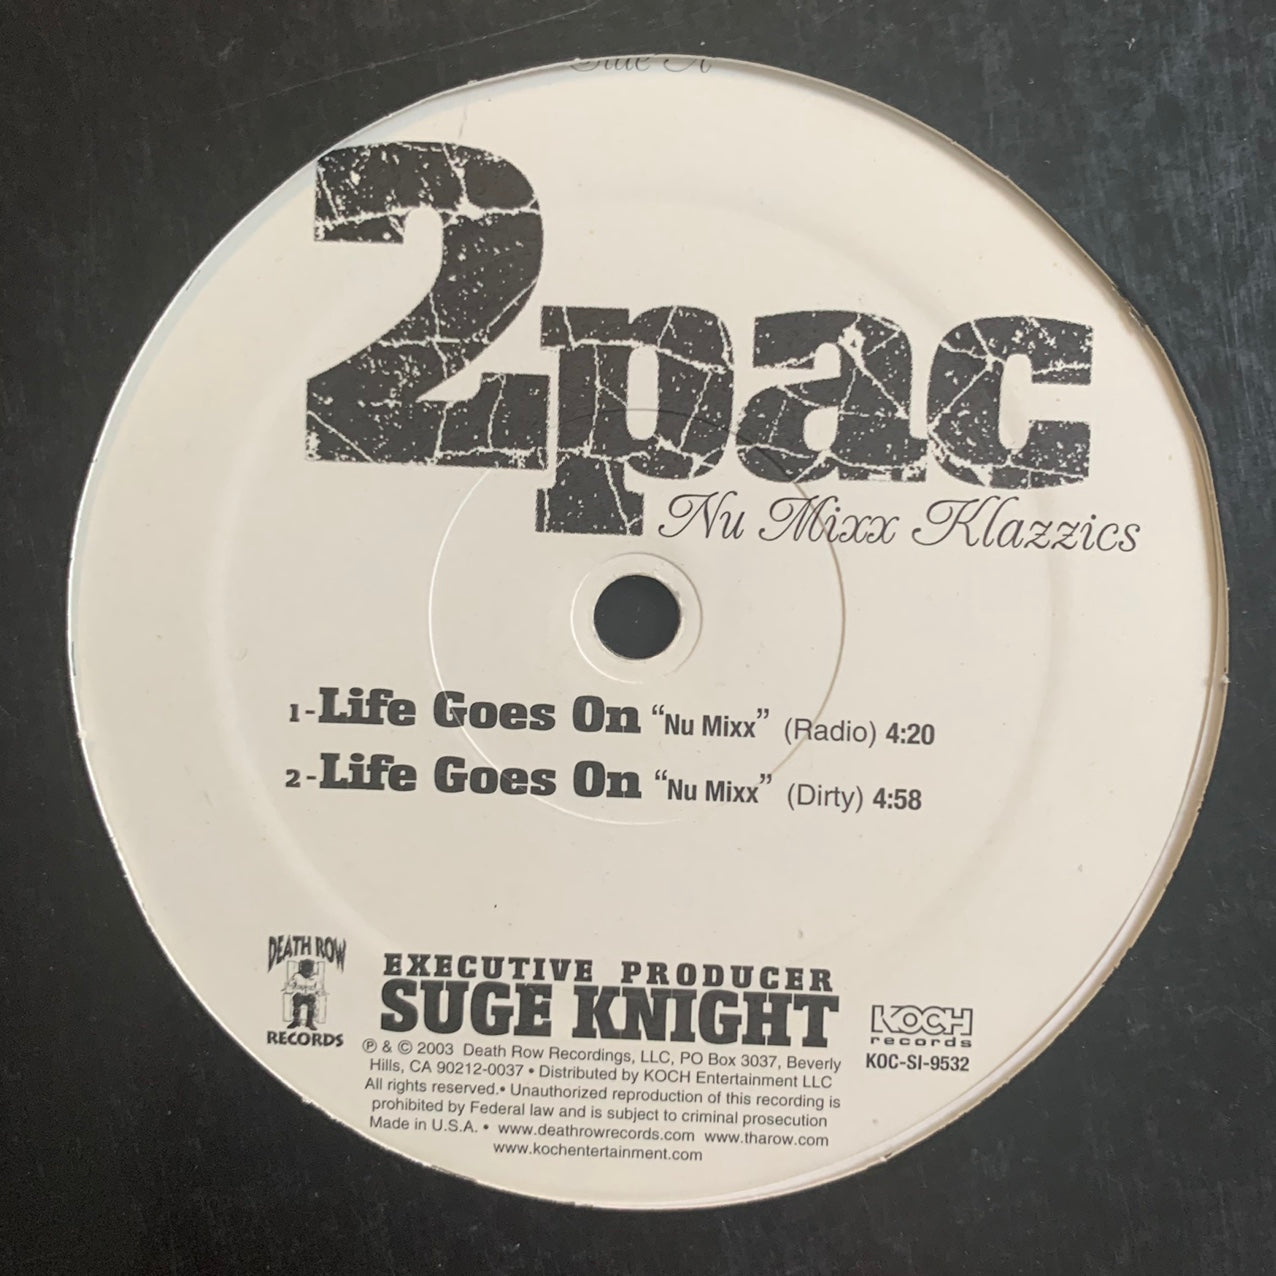 2pac “2 Of Amerikazaz Most Wanted” / “Like Goes on” 4 Version 12inch Vinyl